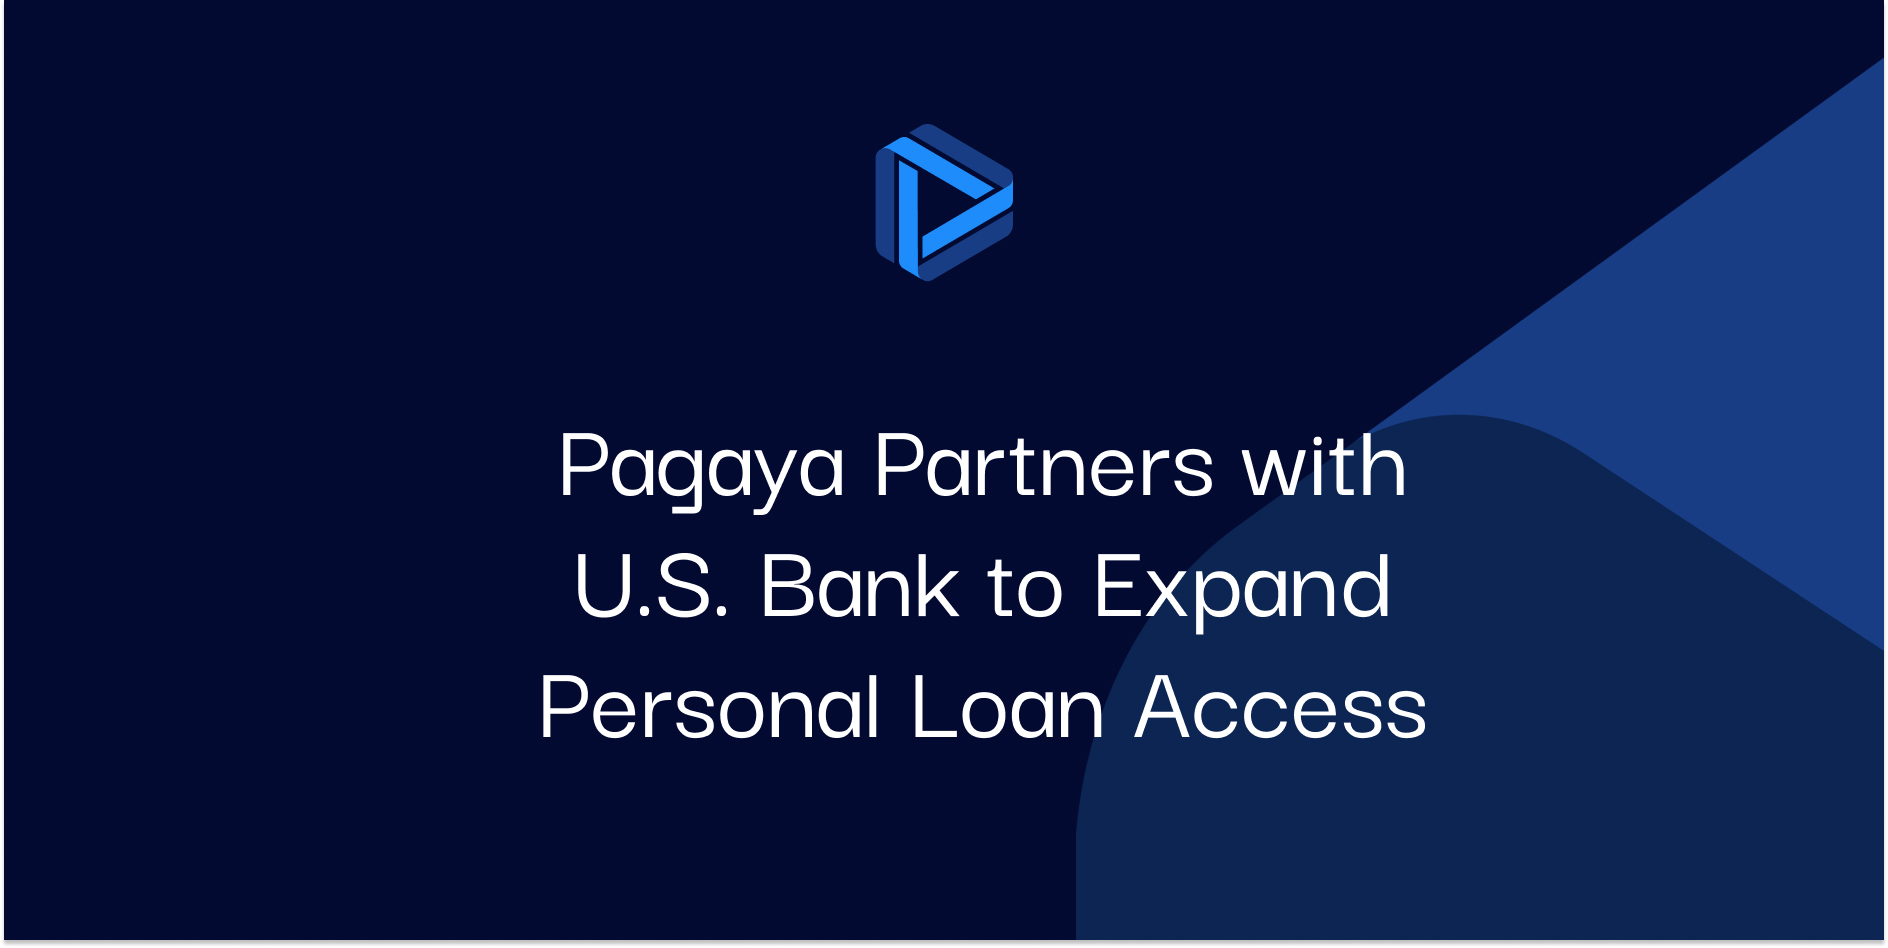 Pagaya Partners with U.S. Bank to Expand Personal Loan Access